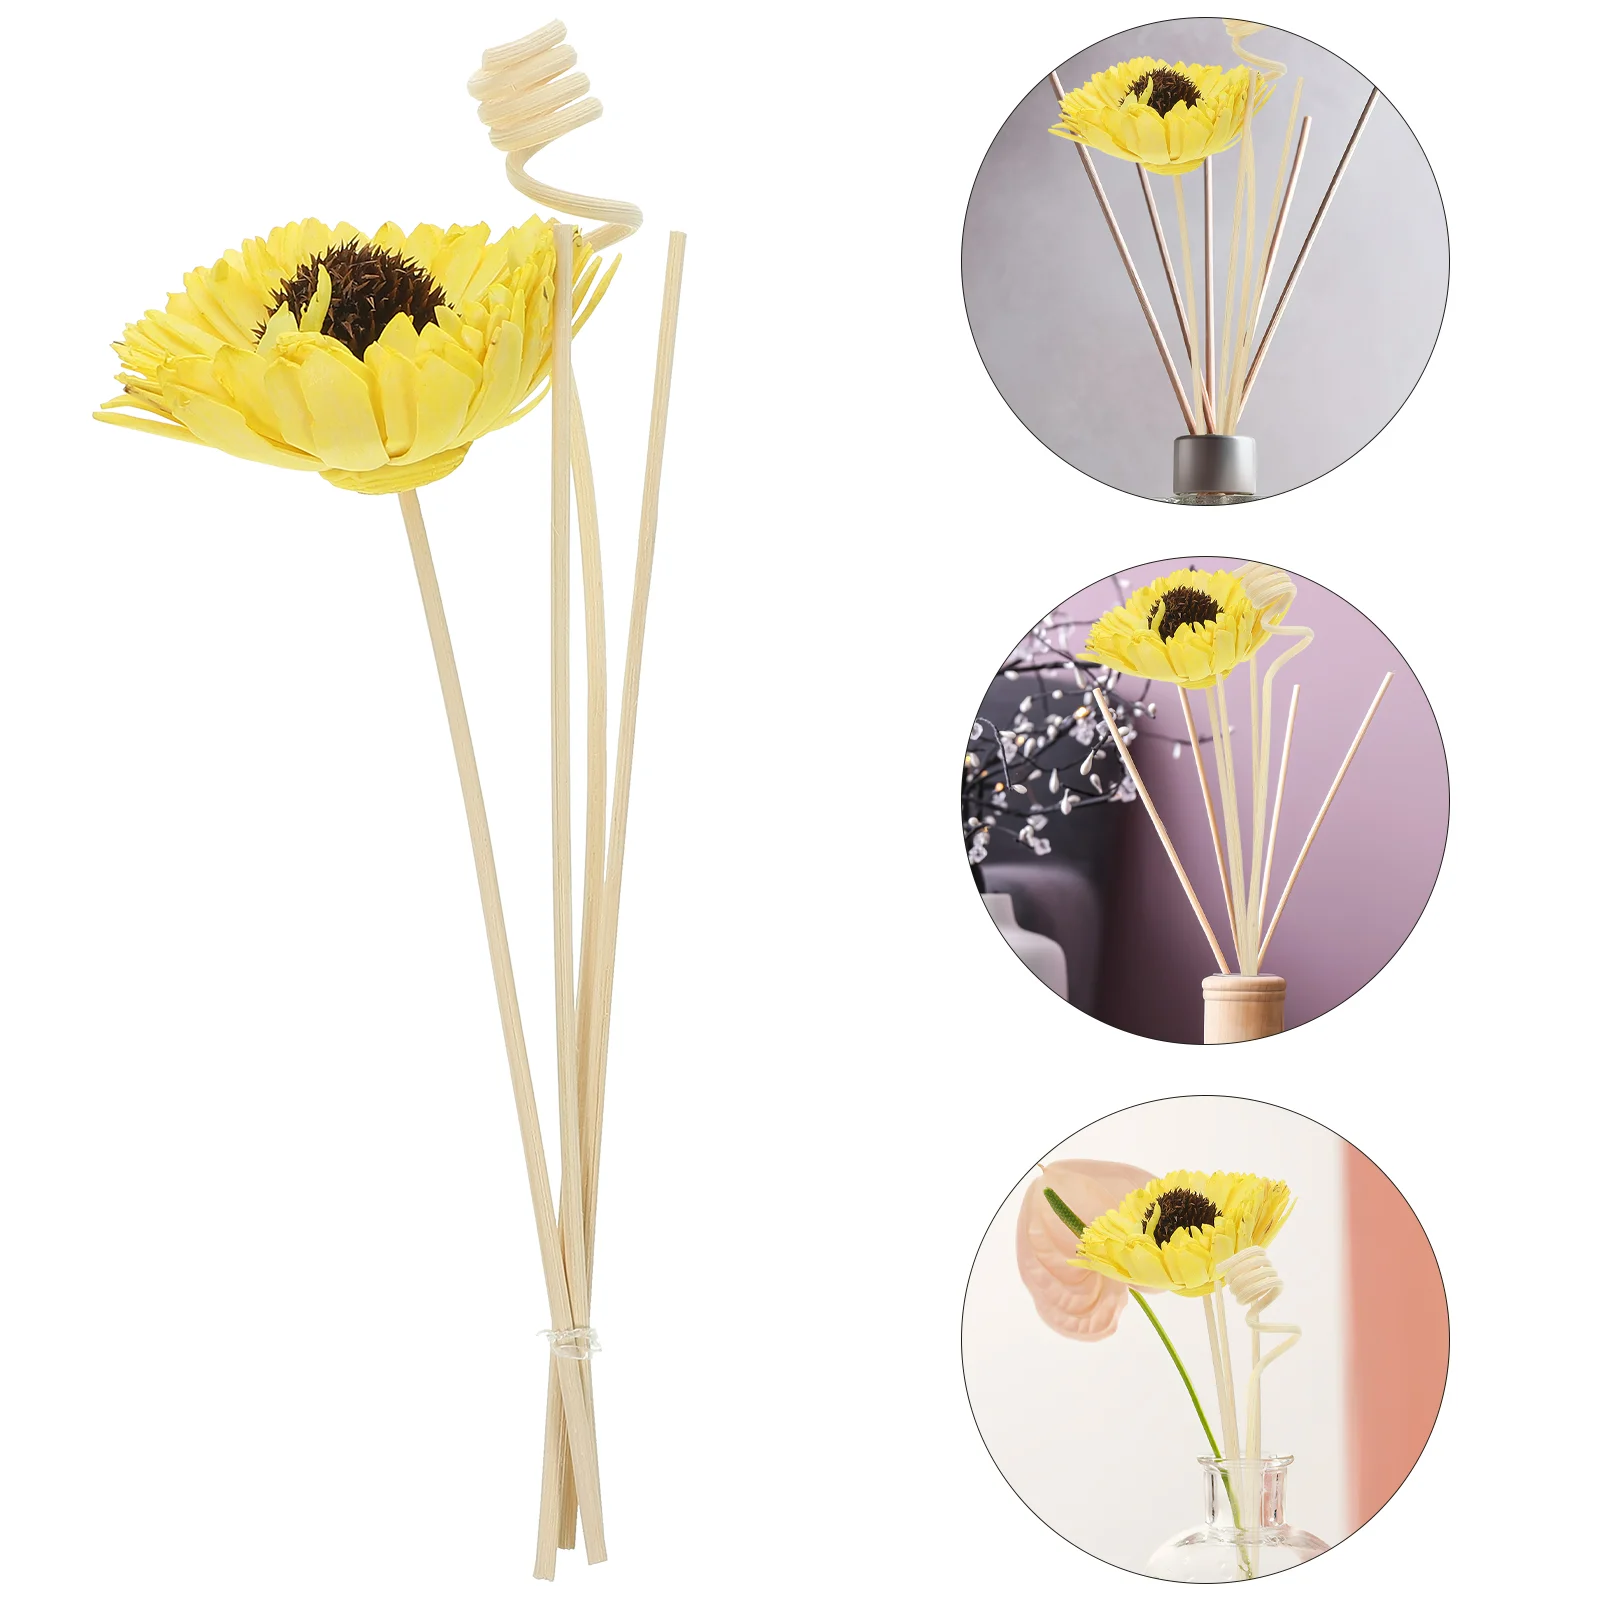 

Room Aroma Sticks Replaceable Reed Meditation Aromatherapy Accessories Essential Oil Diffusers Dried Flowers